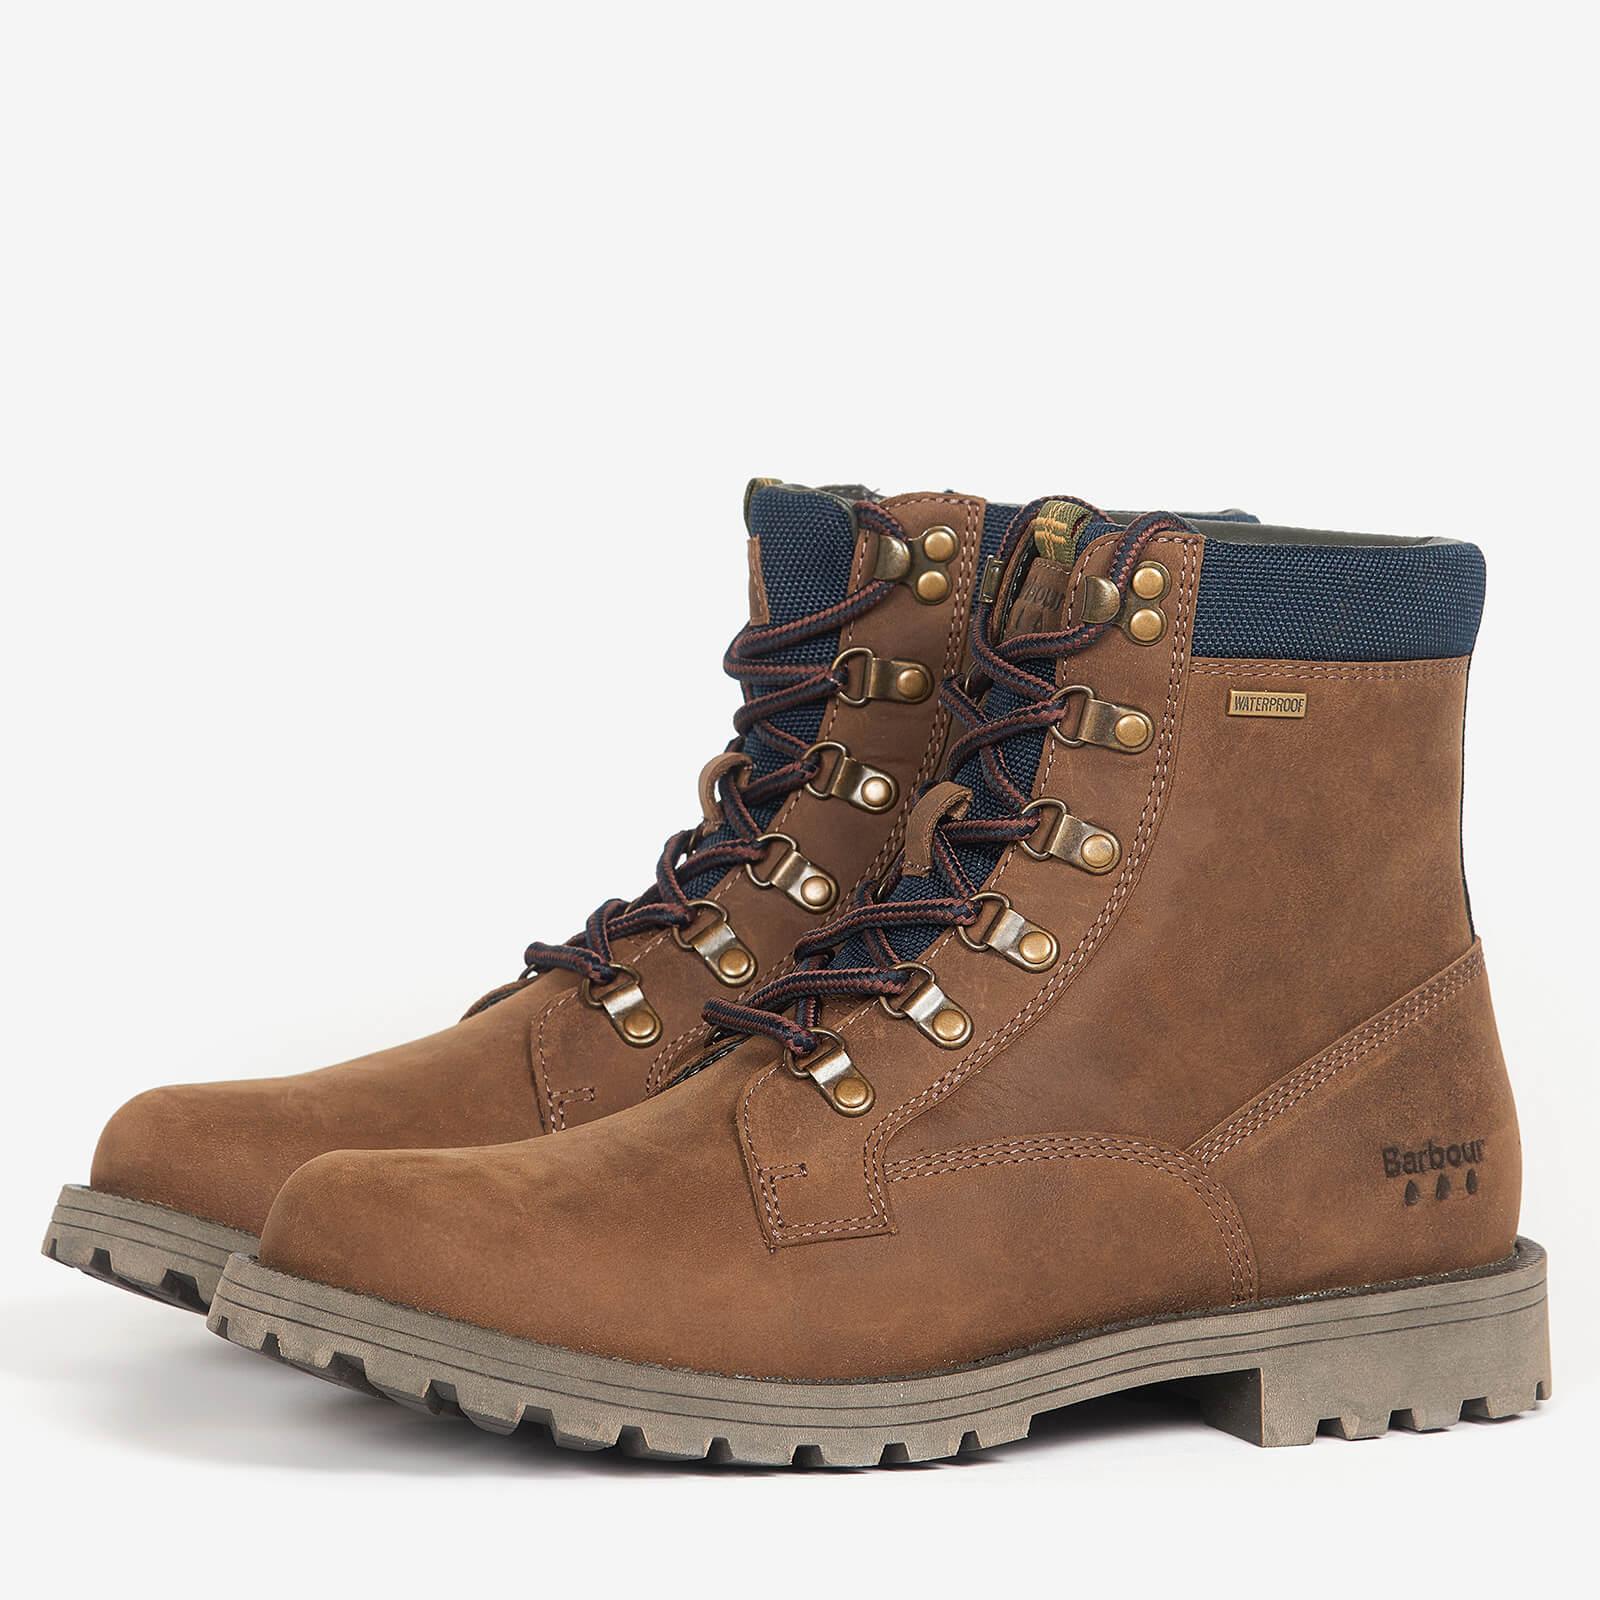 Barbour Chiltern Waterproof Hiking Style Boots in Tan (Brown) for Men | Lyst